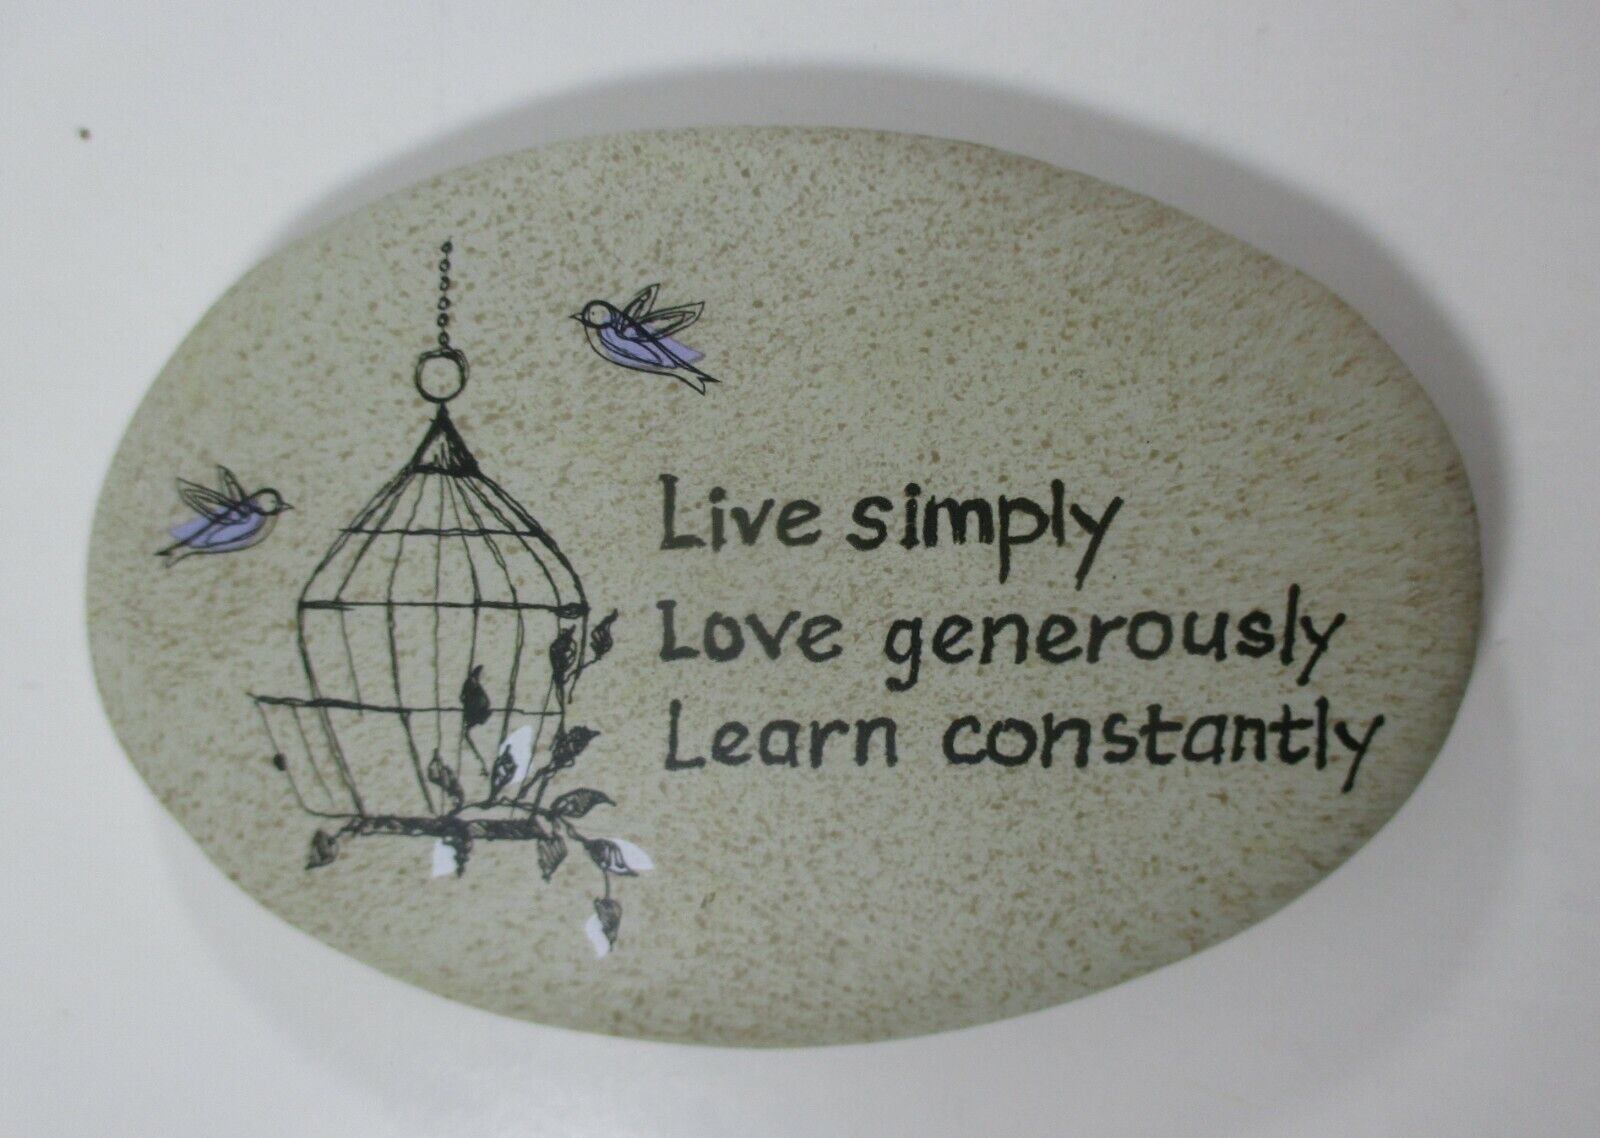 ABB Live simply love generously learn constantly BY HAND STONE FIGURINE ganz